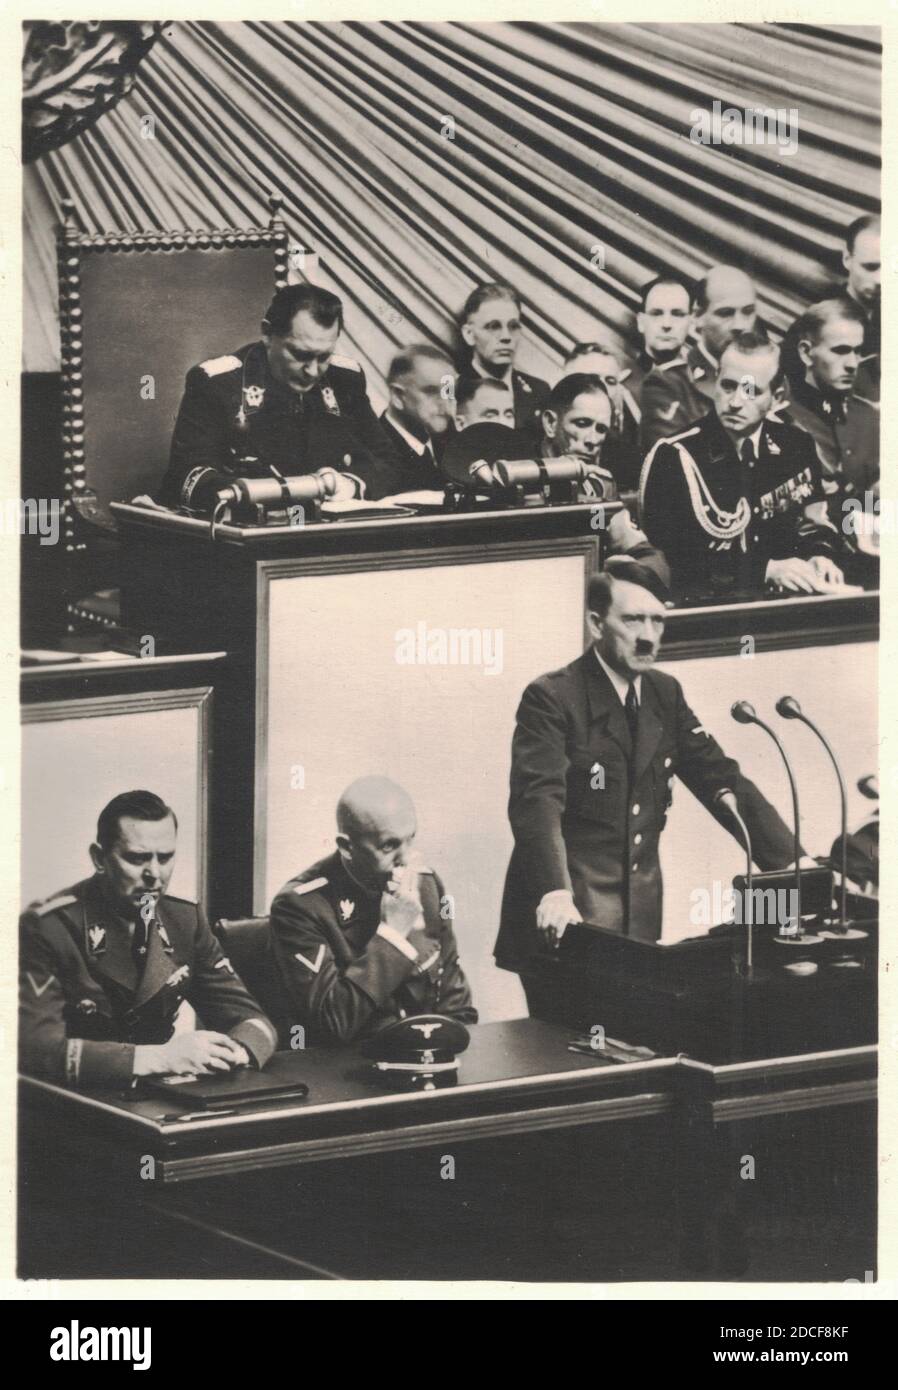 BERLIN, GERMANY - SEPTEMBER 1, 1939: Address by Adolf Hitler, Chancellor of the Reich, before the Reichstag, September 1, 1939 Stock Photo